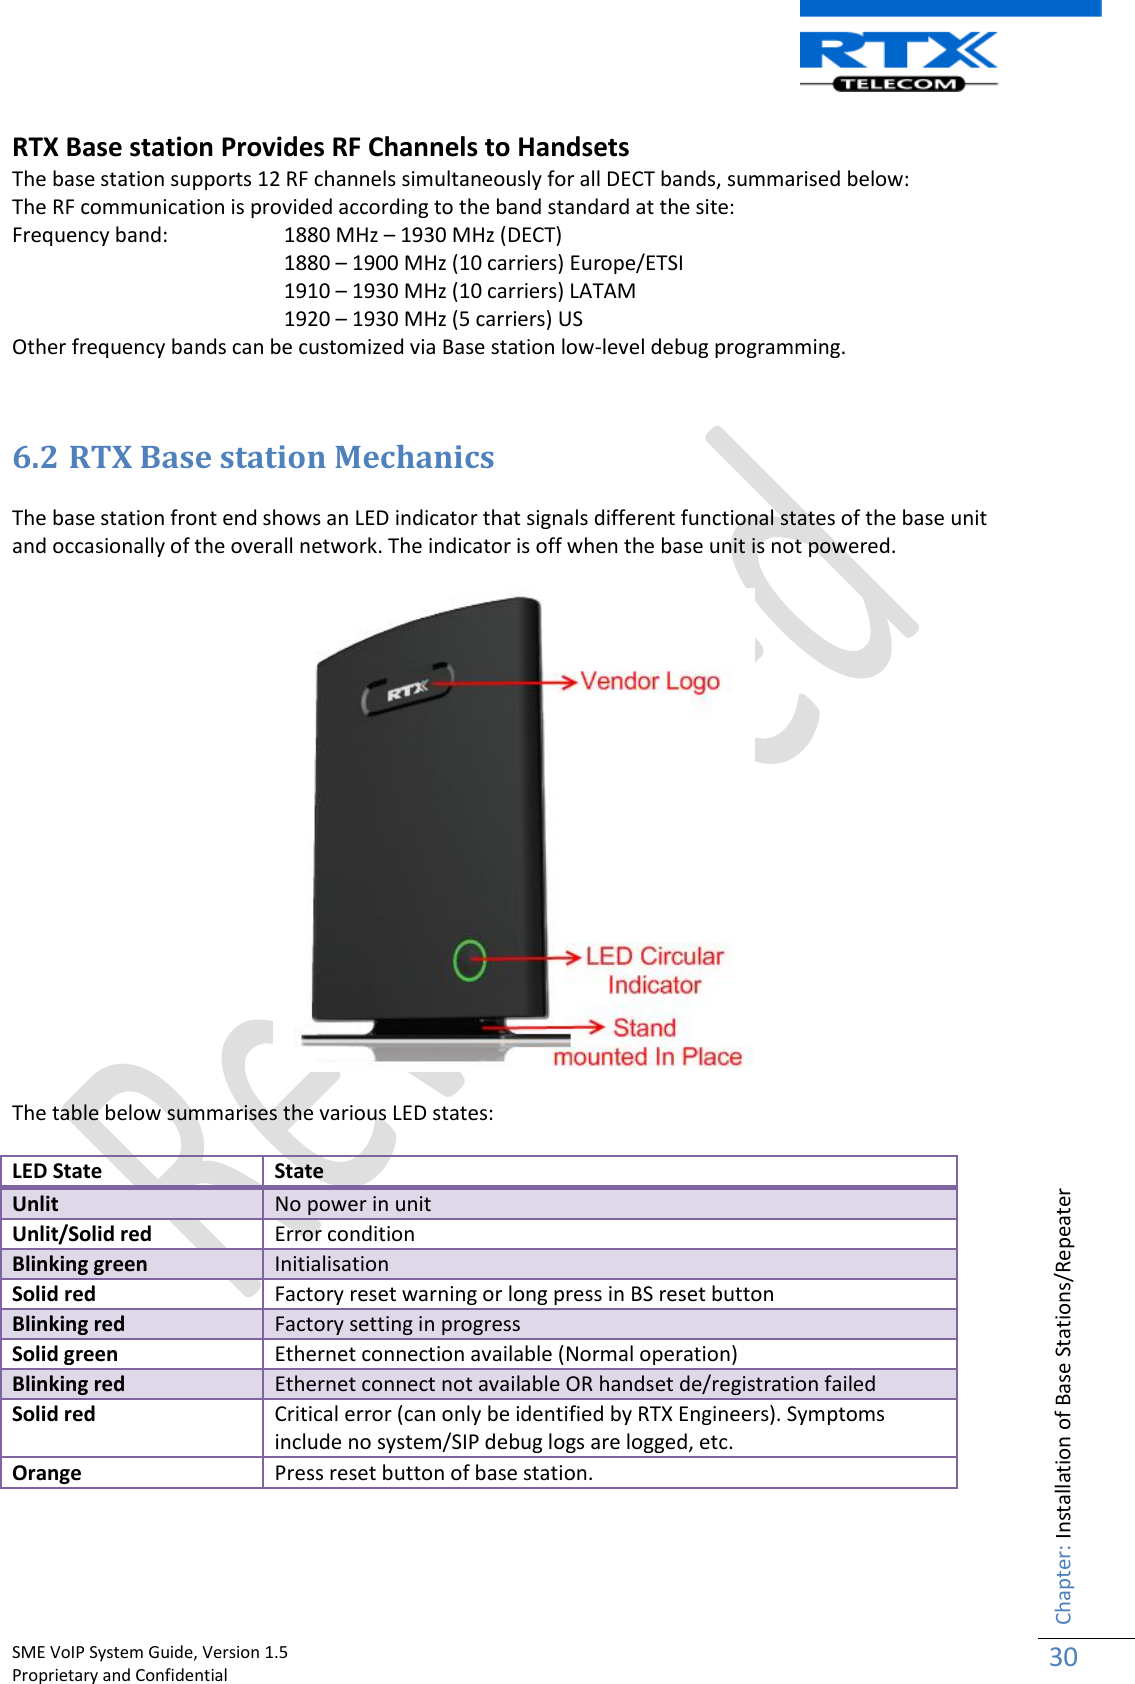    SME VoIP System Guide, Version 1.5                                                                                                                                                          Proprietary and Confidential    Chapter: Installation of Base Stations/Repeater 30  RTX Base station Provides RF Channels to Handsets The base station supports 12 RF channels simultaneously for all DECT bands, summarised below: The RF communication is provided according to the band standard at the site: Frequency band:   1880 MHz – 1930 MHz (DECT) 1880 – 1900 MHz (10 carriers) Europe/ETSI 1910 – 1930 MHz (10 carriers) LATAM 1920 – 1930 MHz (5 carriers) US Other frequency bands can be customized via Base station low-level debug programming.   6.2 RTX Base station Mechanics  The base station front end shows an LED indicator that signals different functional states of the base unit and occasionally of the overall network. The indicator is off when the base unit is not powered.     The table below summarises the various LED states:  LED State State Unlit No power in unit Unlit/Solid red Error condition Blinking green Initialisation Solid red Factory reset warning or long press in BS reset button Blinking red Factory setting in progress Solid green Ethernet connection available (Normal operation) Blinking red Ethernet connect not available OR handset de/registration failed Solid red Critical error (can only be identified by RTX Engineers). Symptoms include no system/SIP debug logs are logged, etc. Orange Press reset button of base station.    